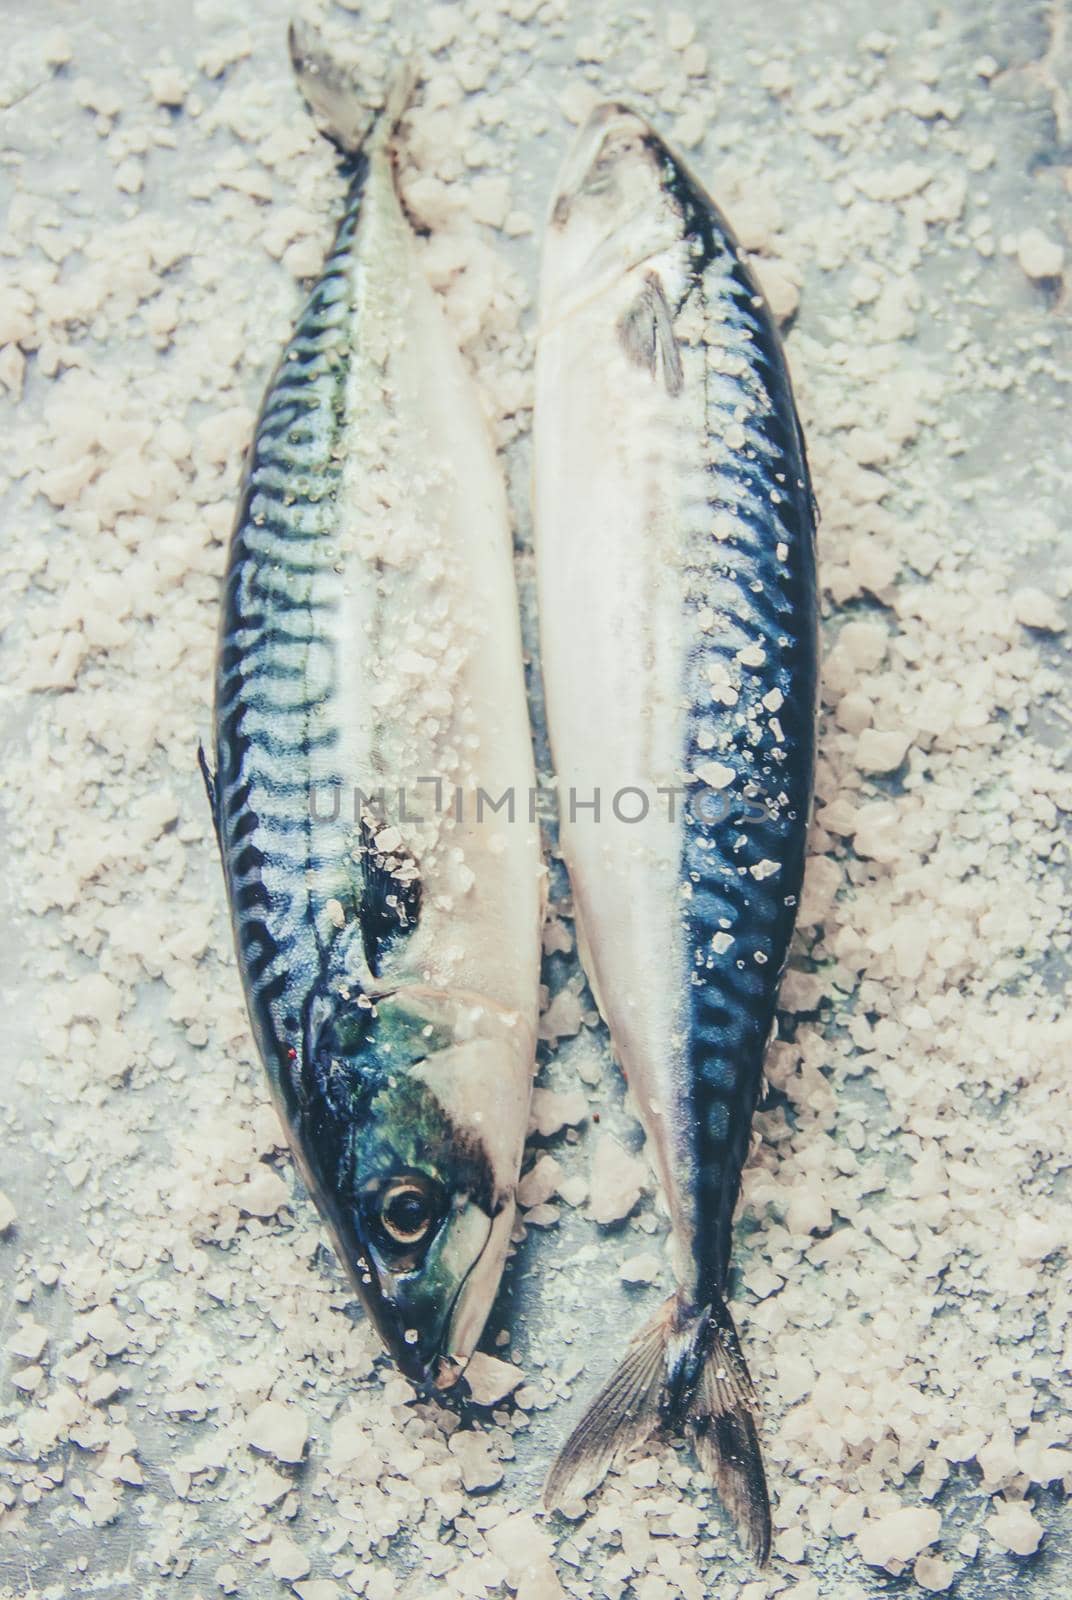 raw fish of mackerel. Selective focus. Food and drink.